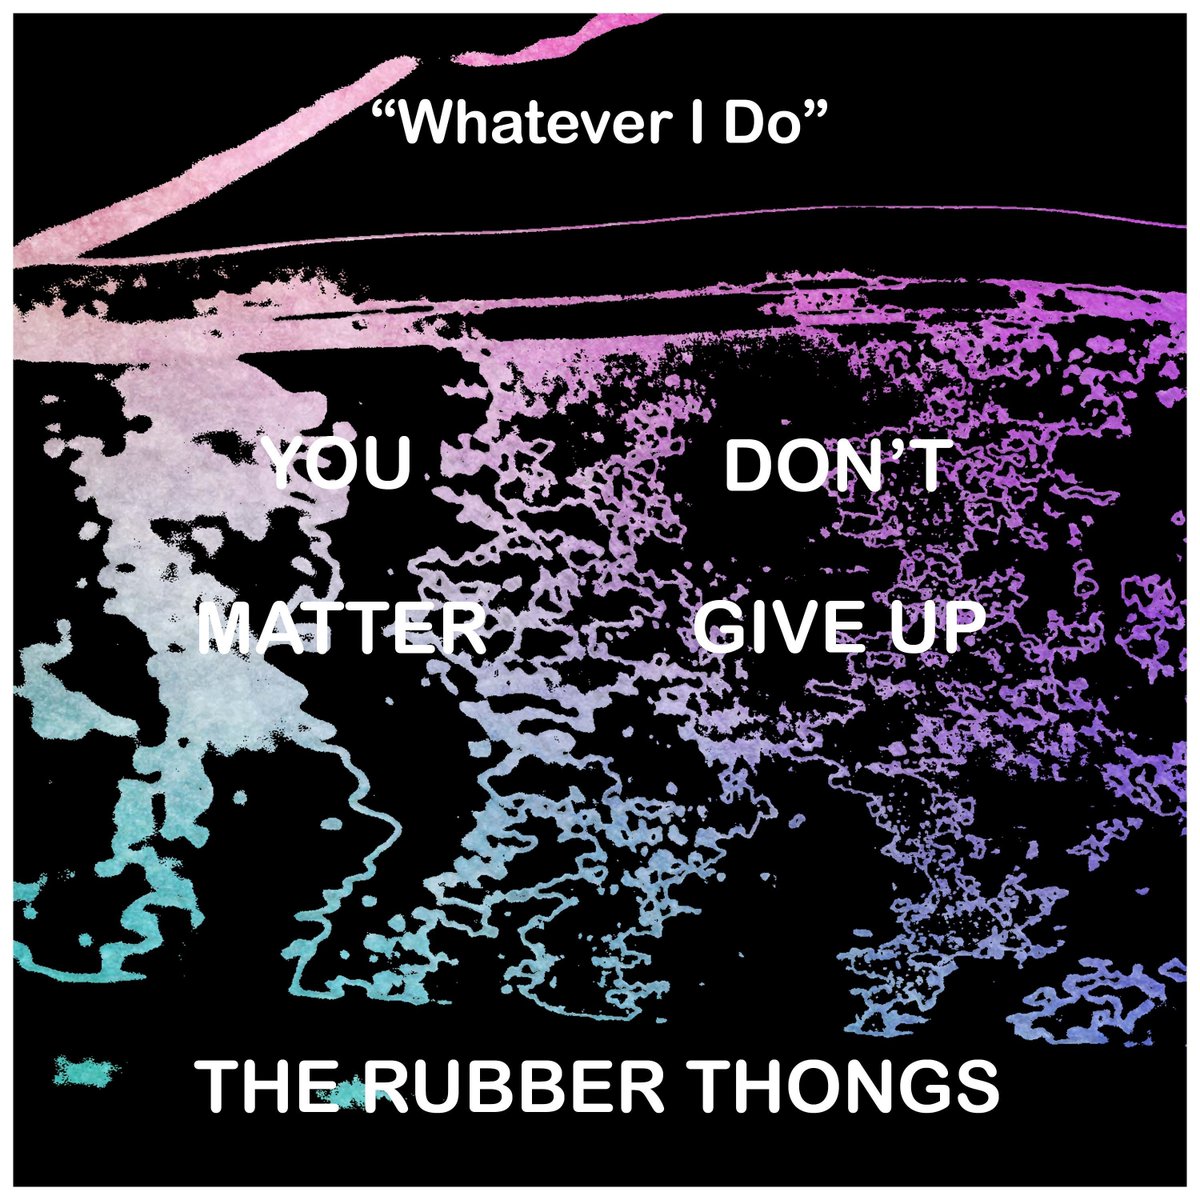 Coming up at 8:30 PM Eastern Time, Lonely Oak Radio plays 'Whatever I Do' by The Rubber Thongs @thethongs. Come and listen at Lonelyoakradio.com #Indieshuffle Classics show.